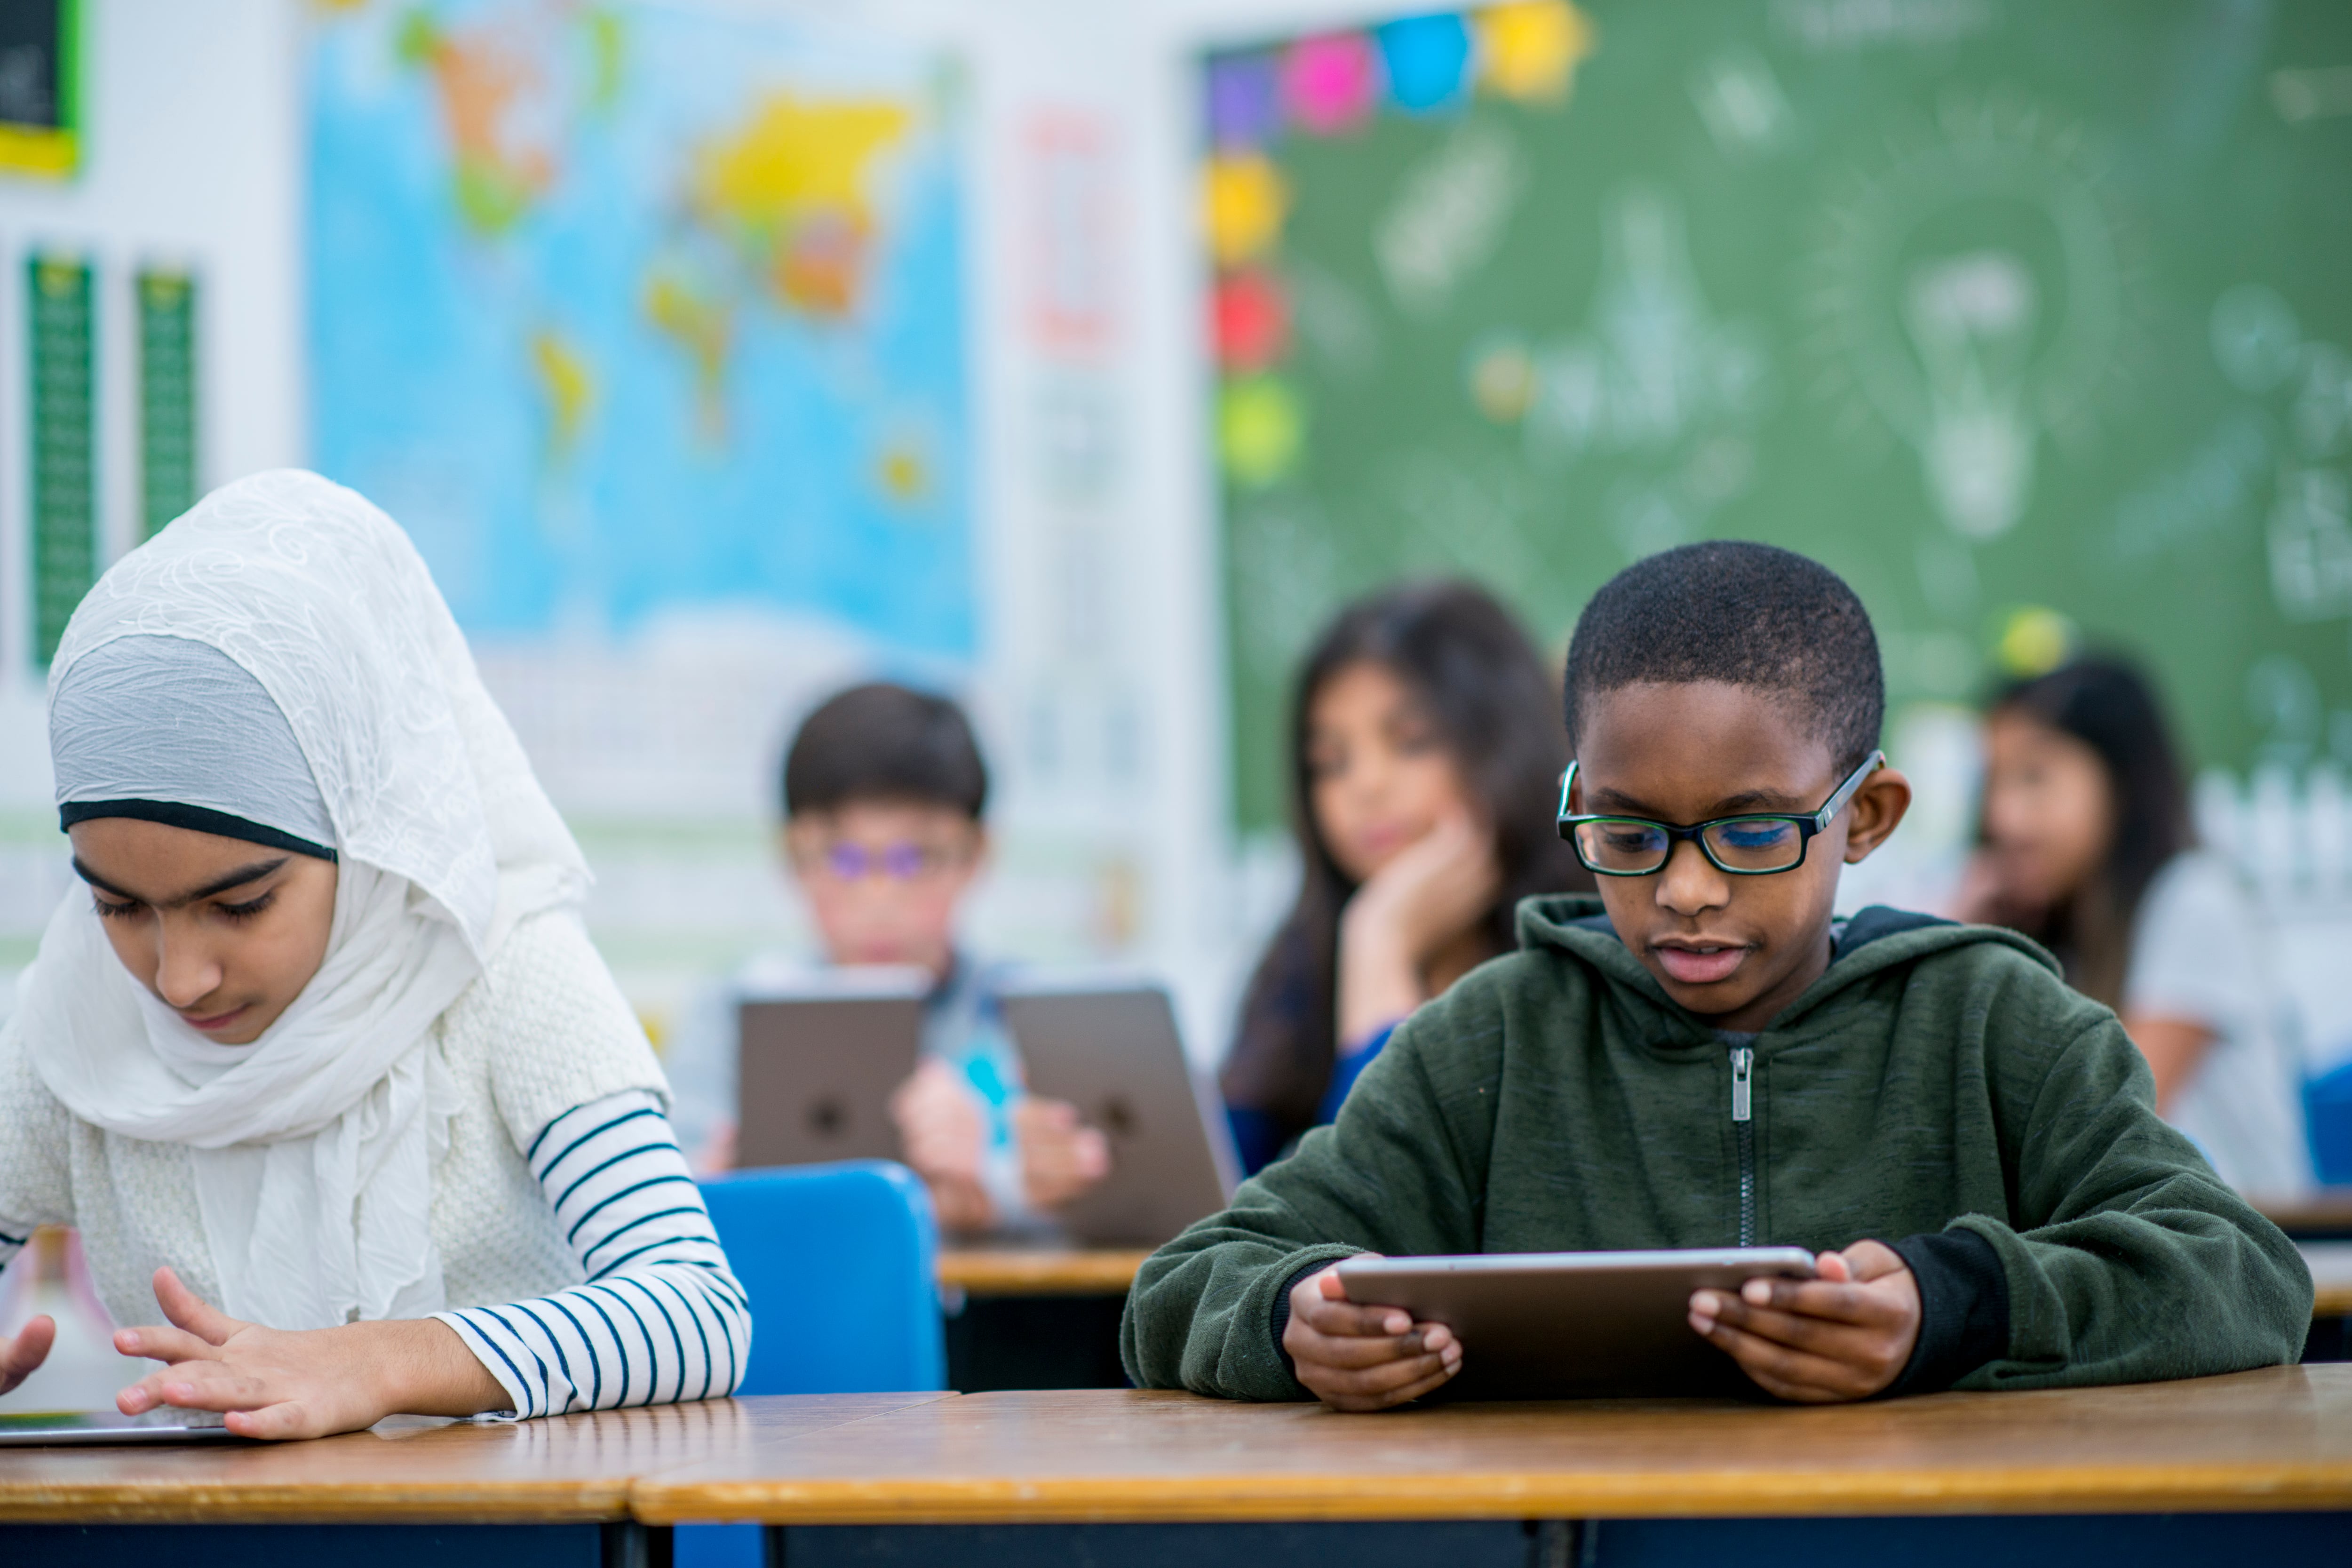 A young girl wearing a white hijab sits at a desk working on a tablet computer. She sits next to a young boy wearing a green sweatshirt with black glasses who is also working on a tablet.